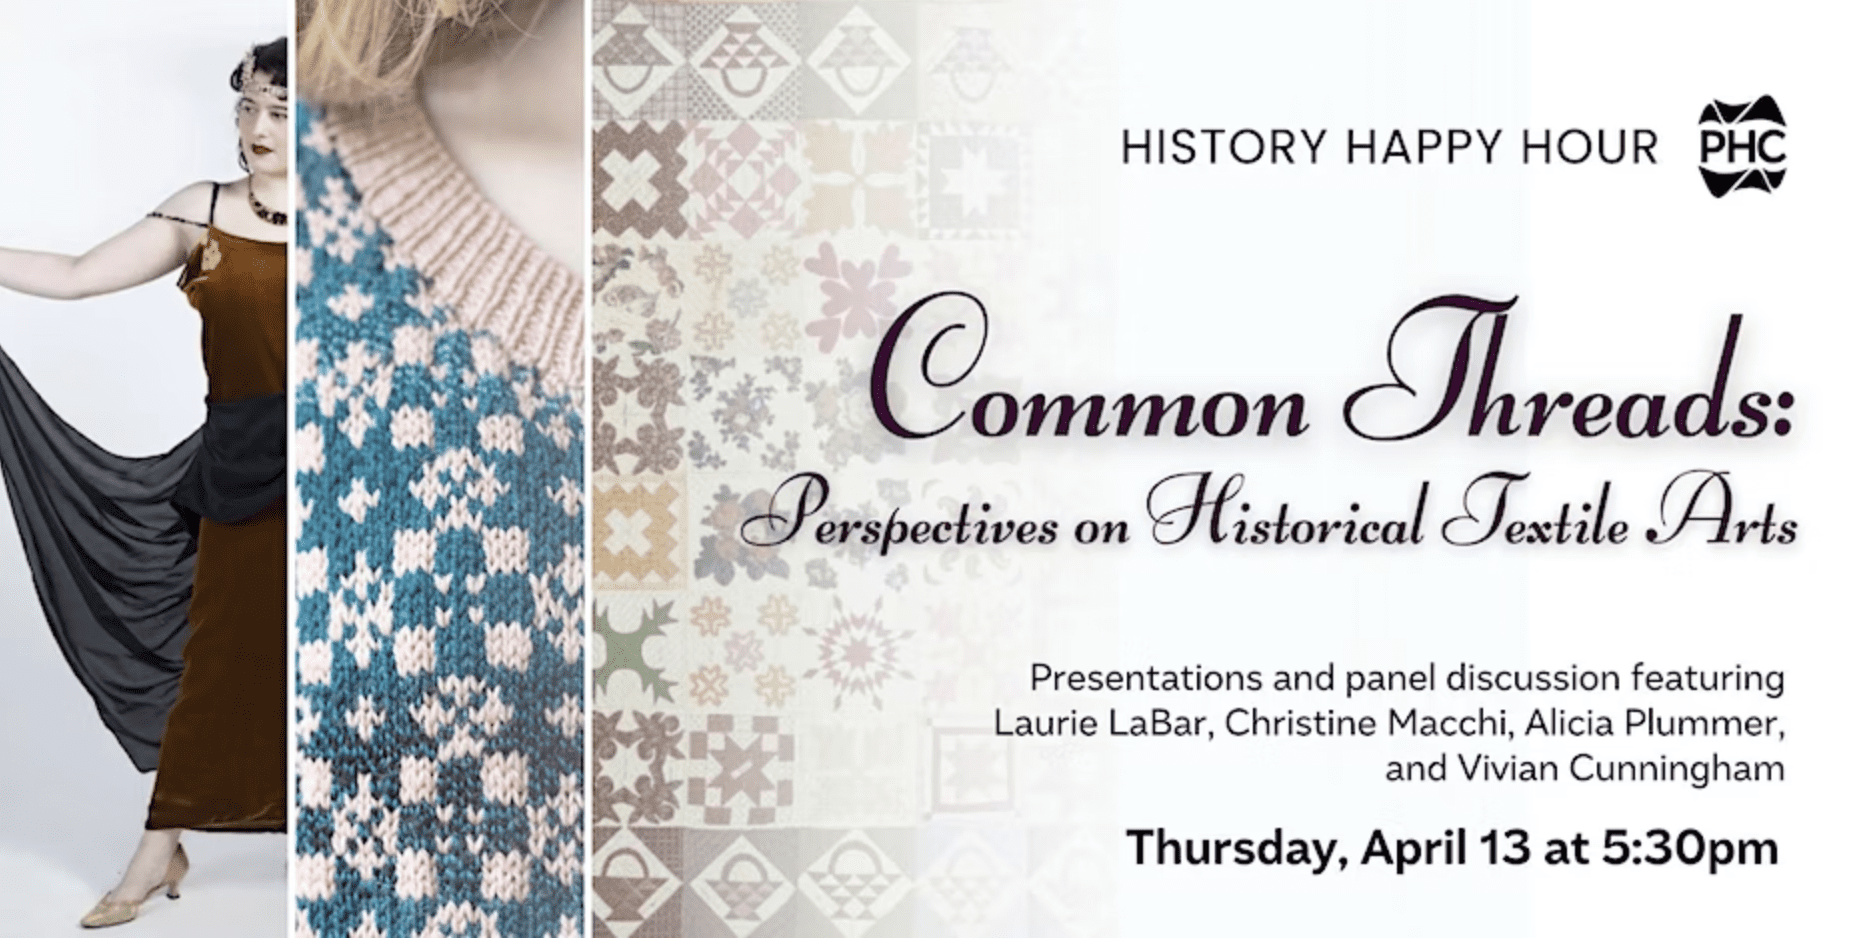 Pejepscot History Center Presents: Common Threads: Perspectives on Historical Textile Arts